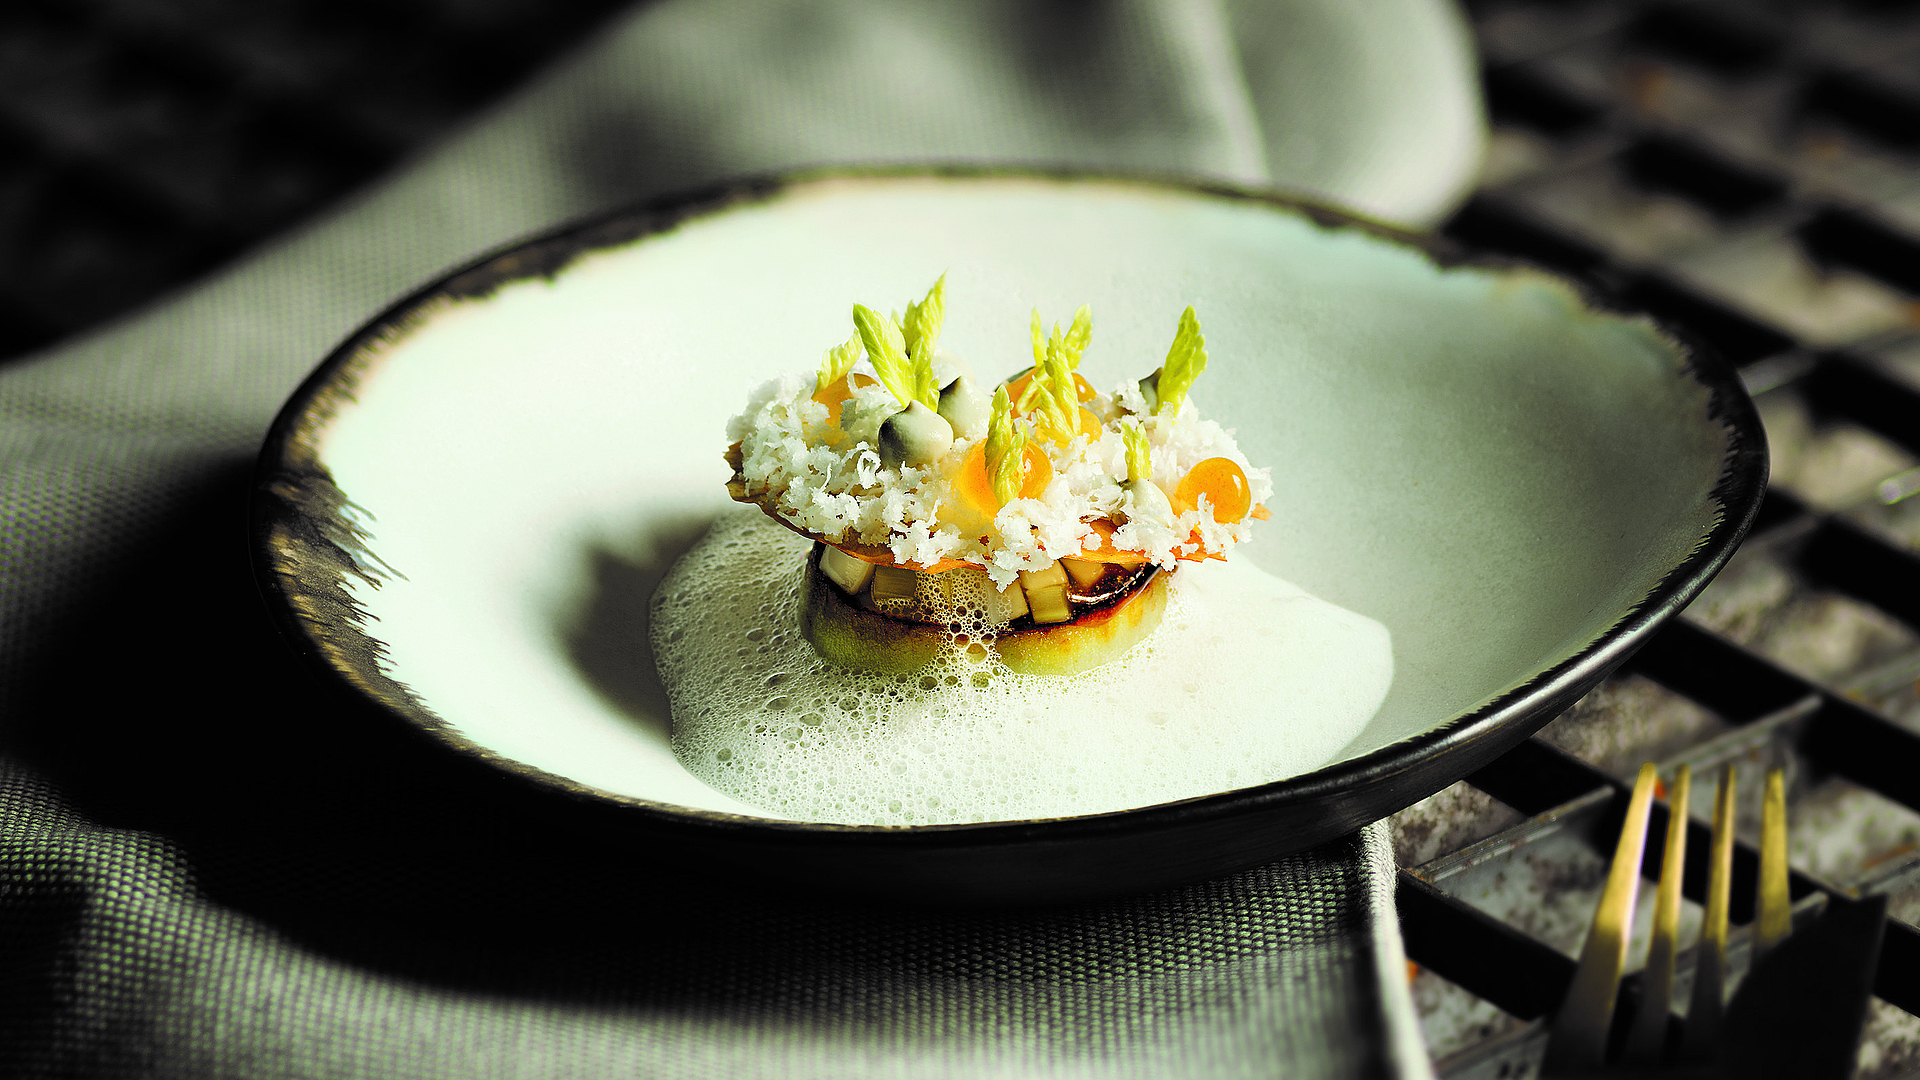 Fried aubergine slices with celery salad and coconut foam 